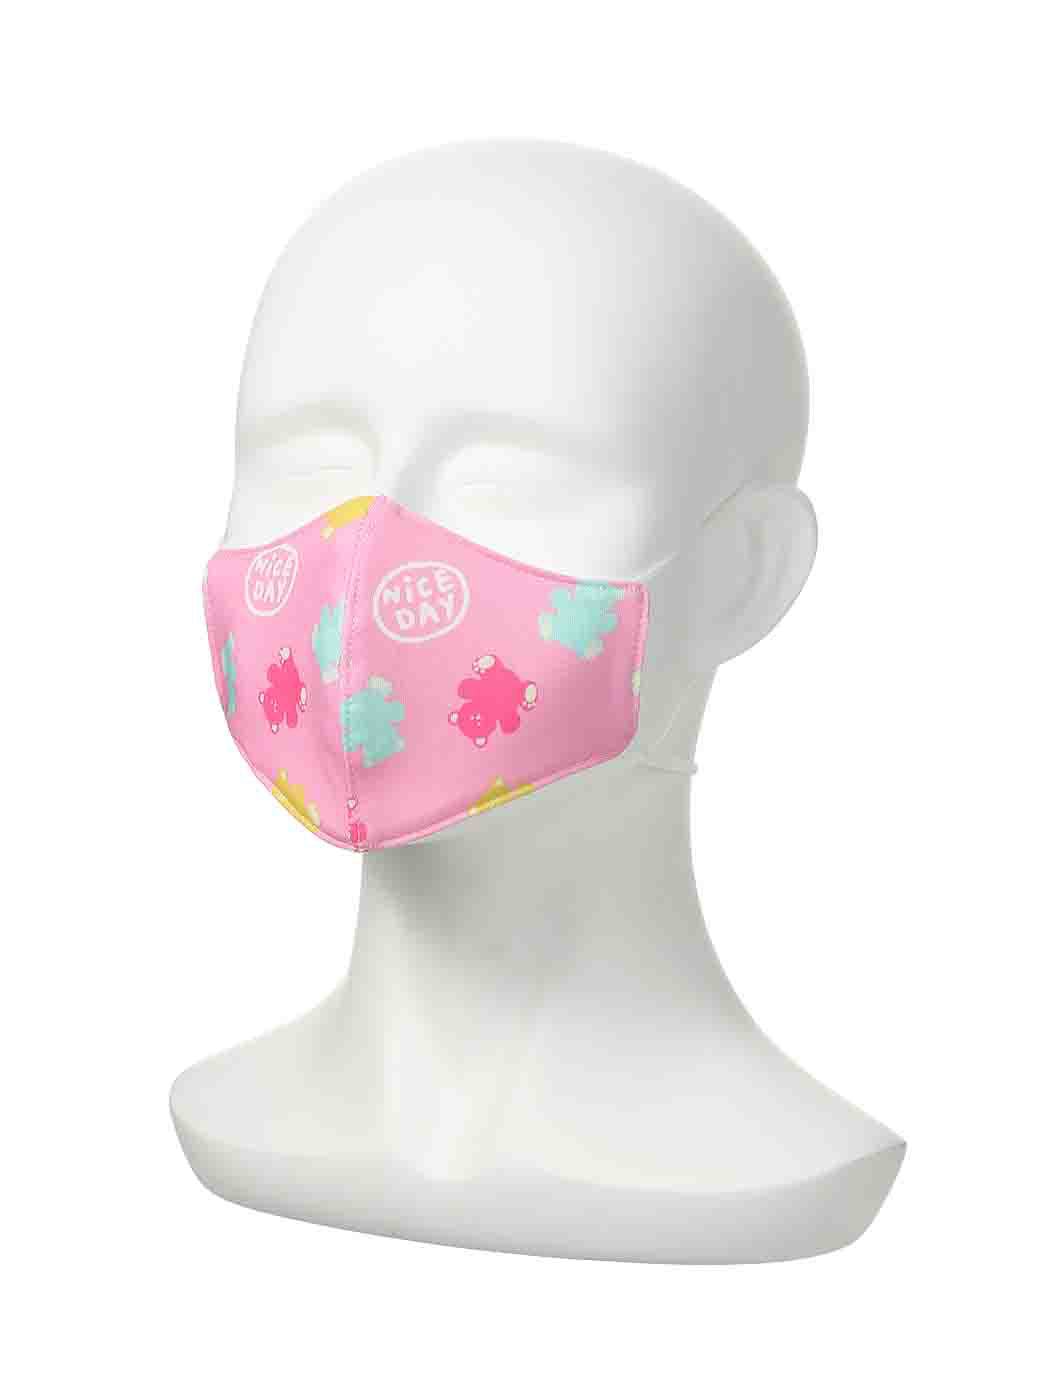 MINISO ZOO SERIES PRINTED FACE MASK FOR KIDS (BEAR) 2010516017100 MOUTH MASK